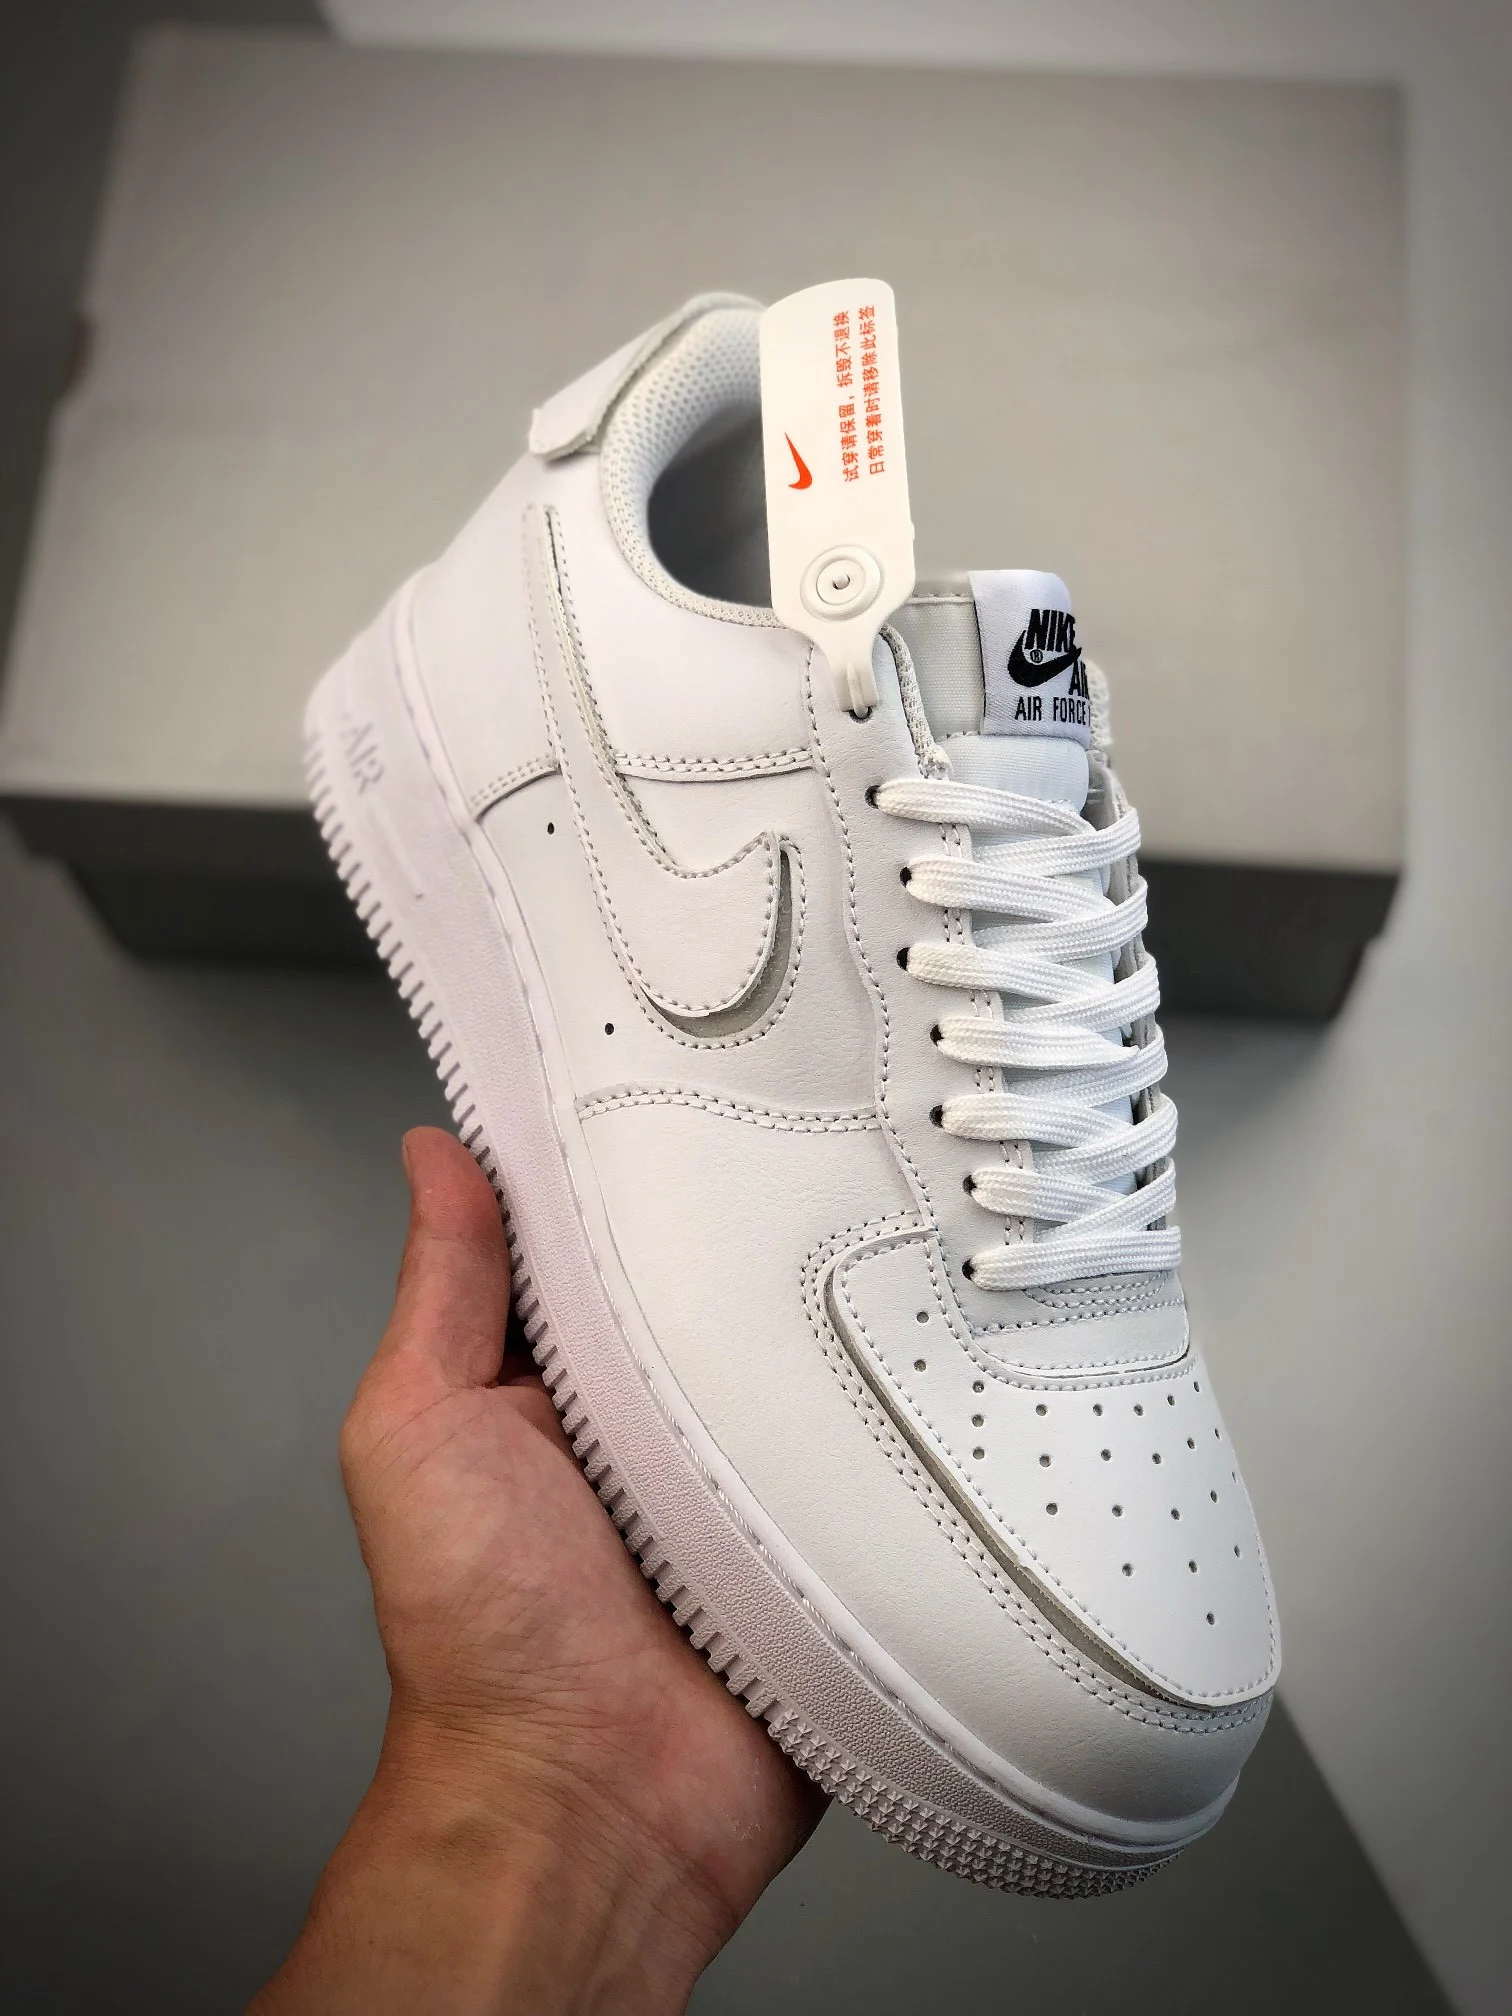 Nike Air Force 1 Low Triple White DB2812-100 For Sale